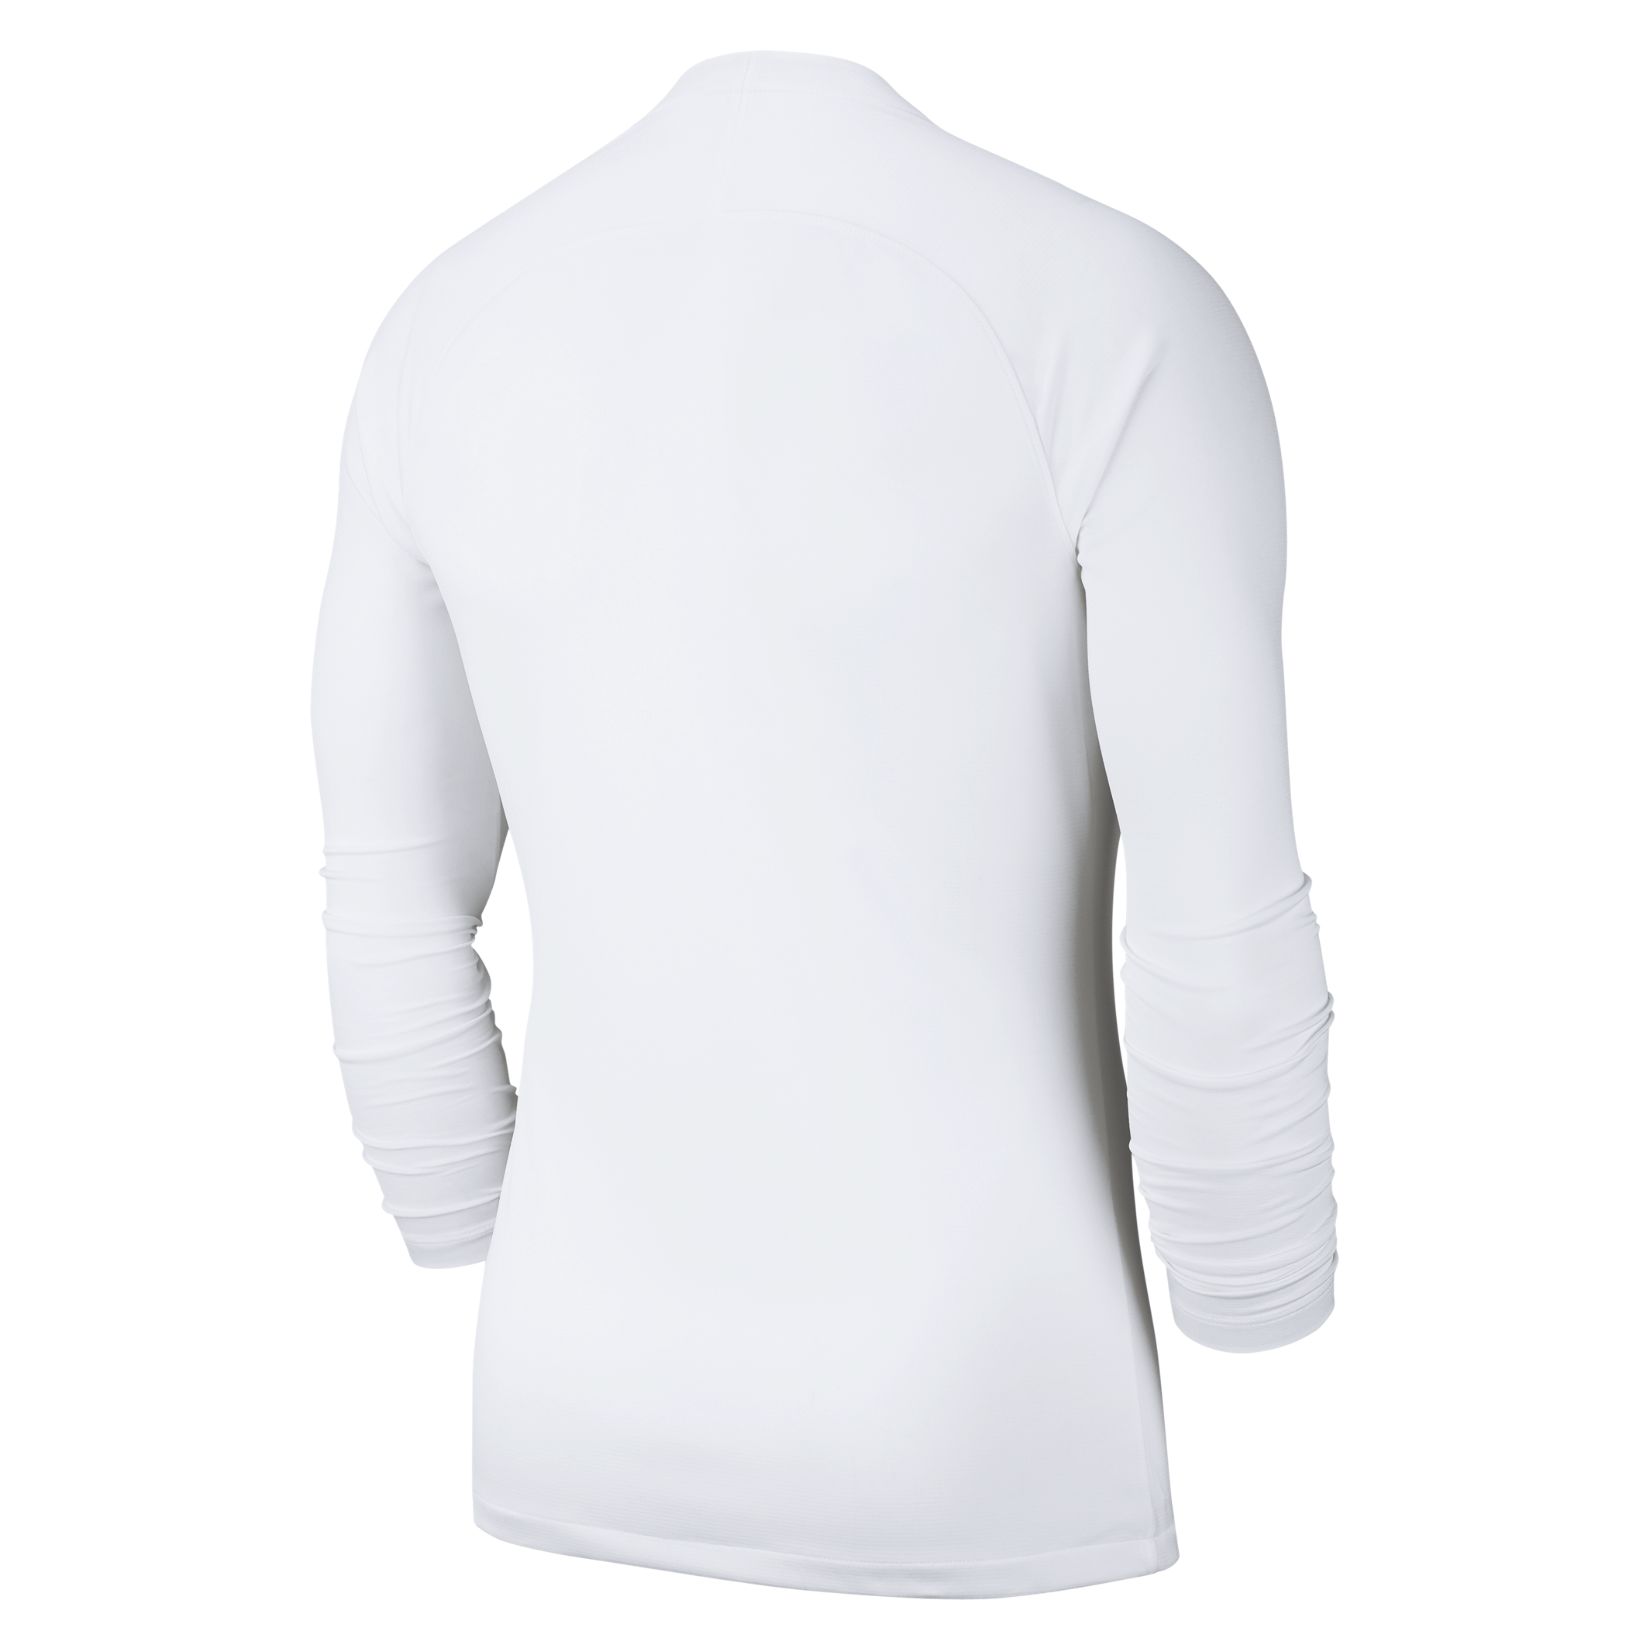 Nike Dri-FIT Park First Layer White-Cool Grey